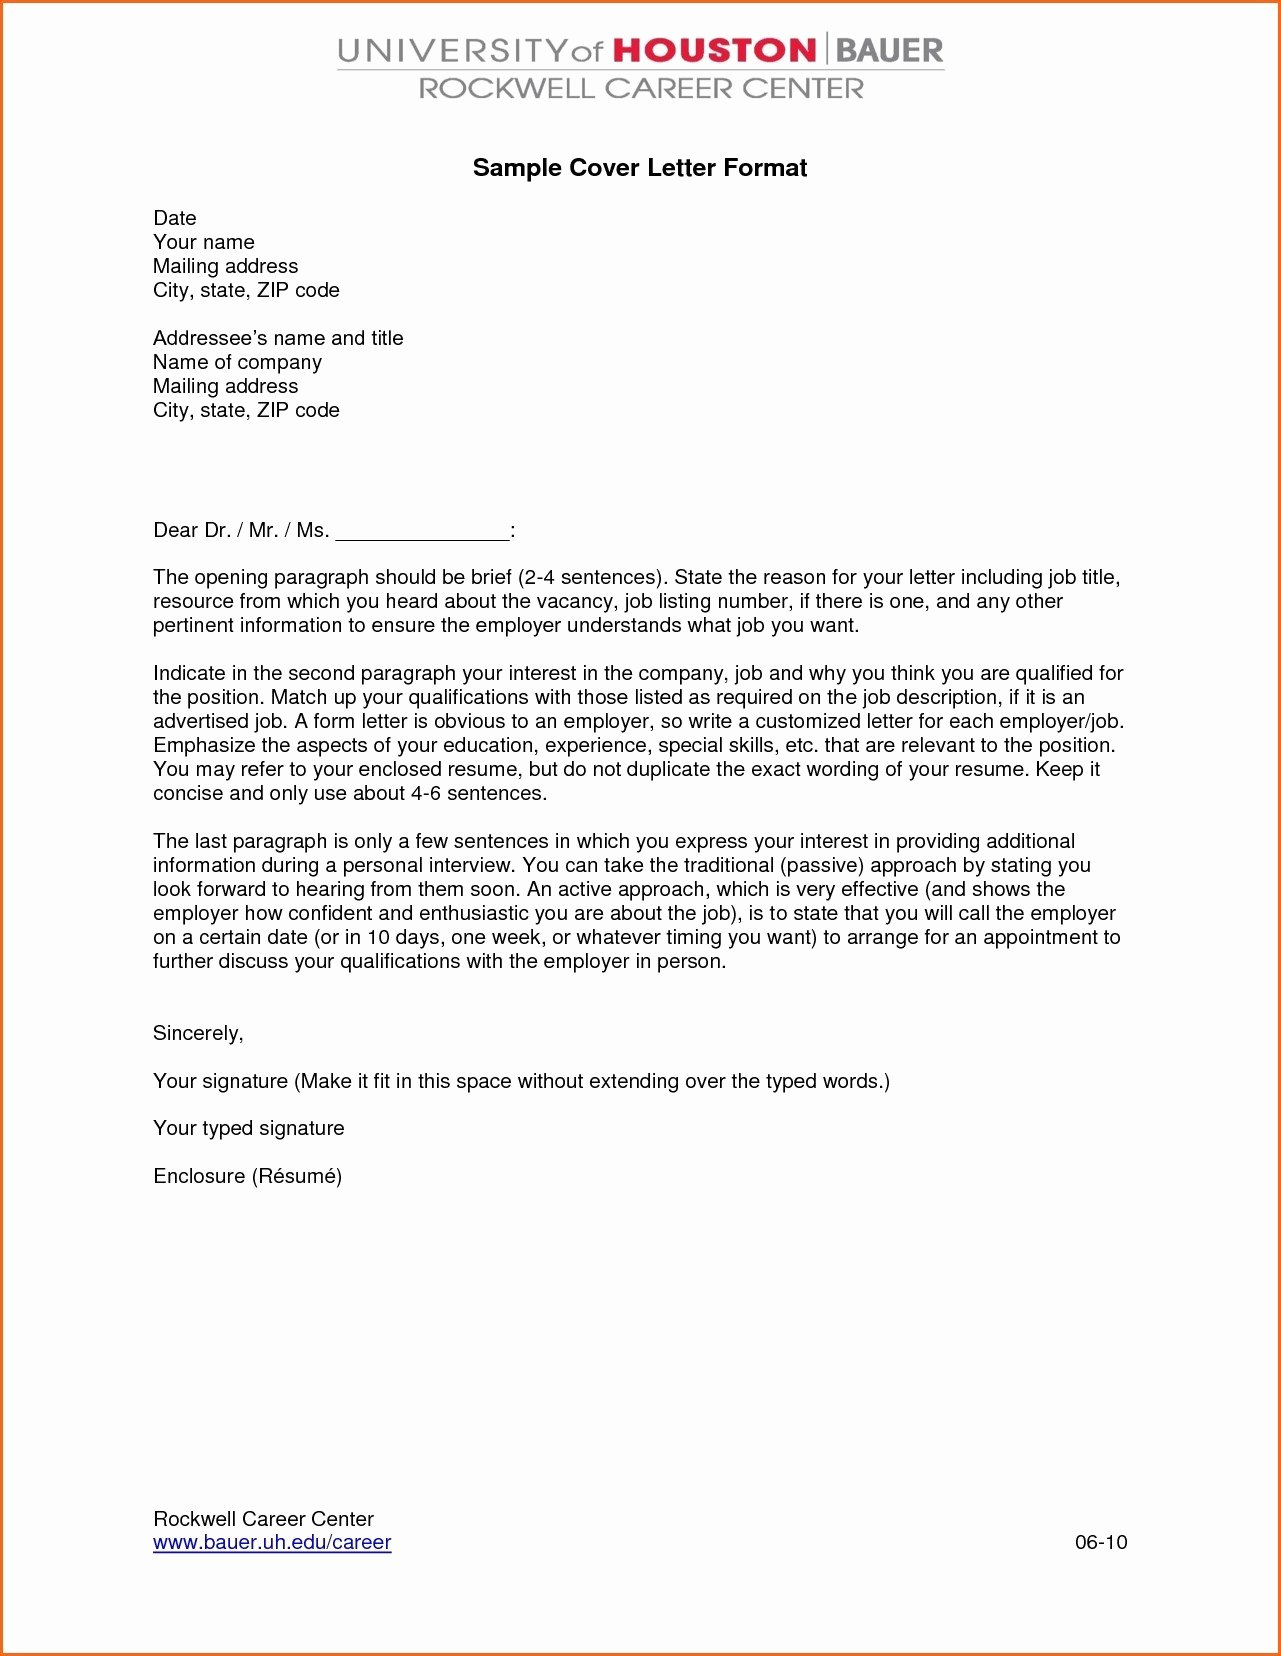 Cover Letter format Google Docs Lovely Cover Letter Template Free Google Docs Bluemooncatering